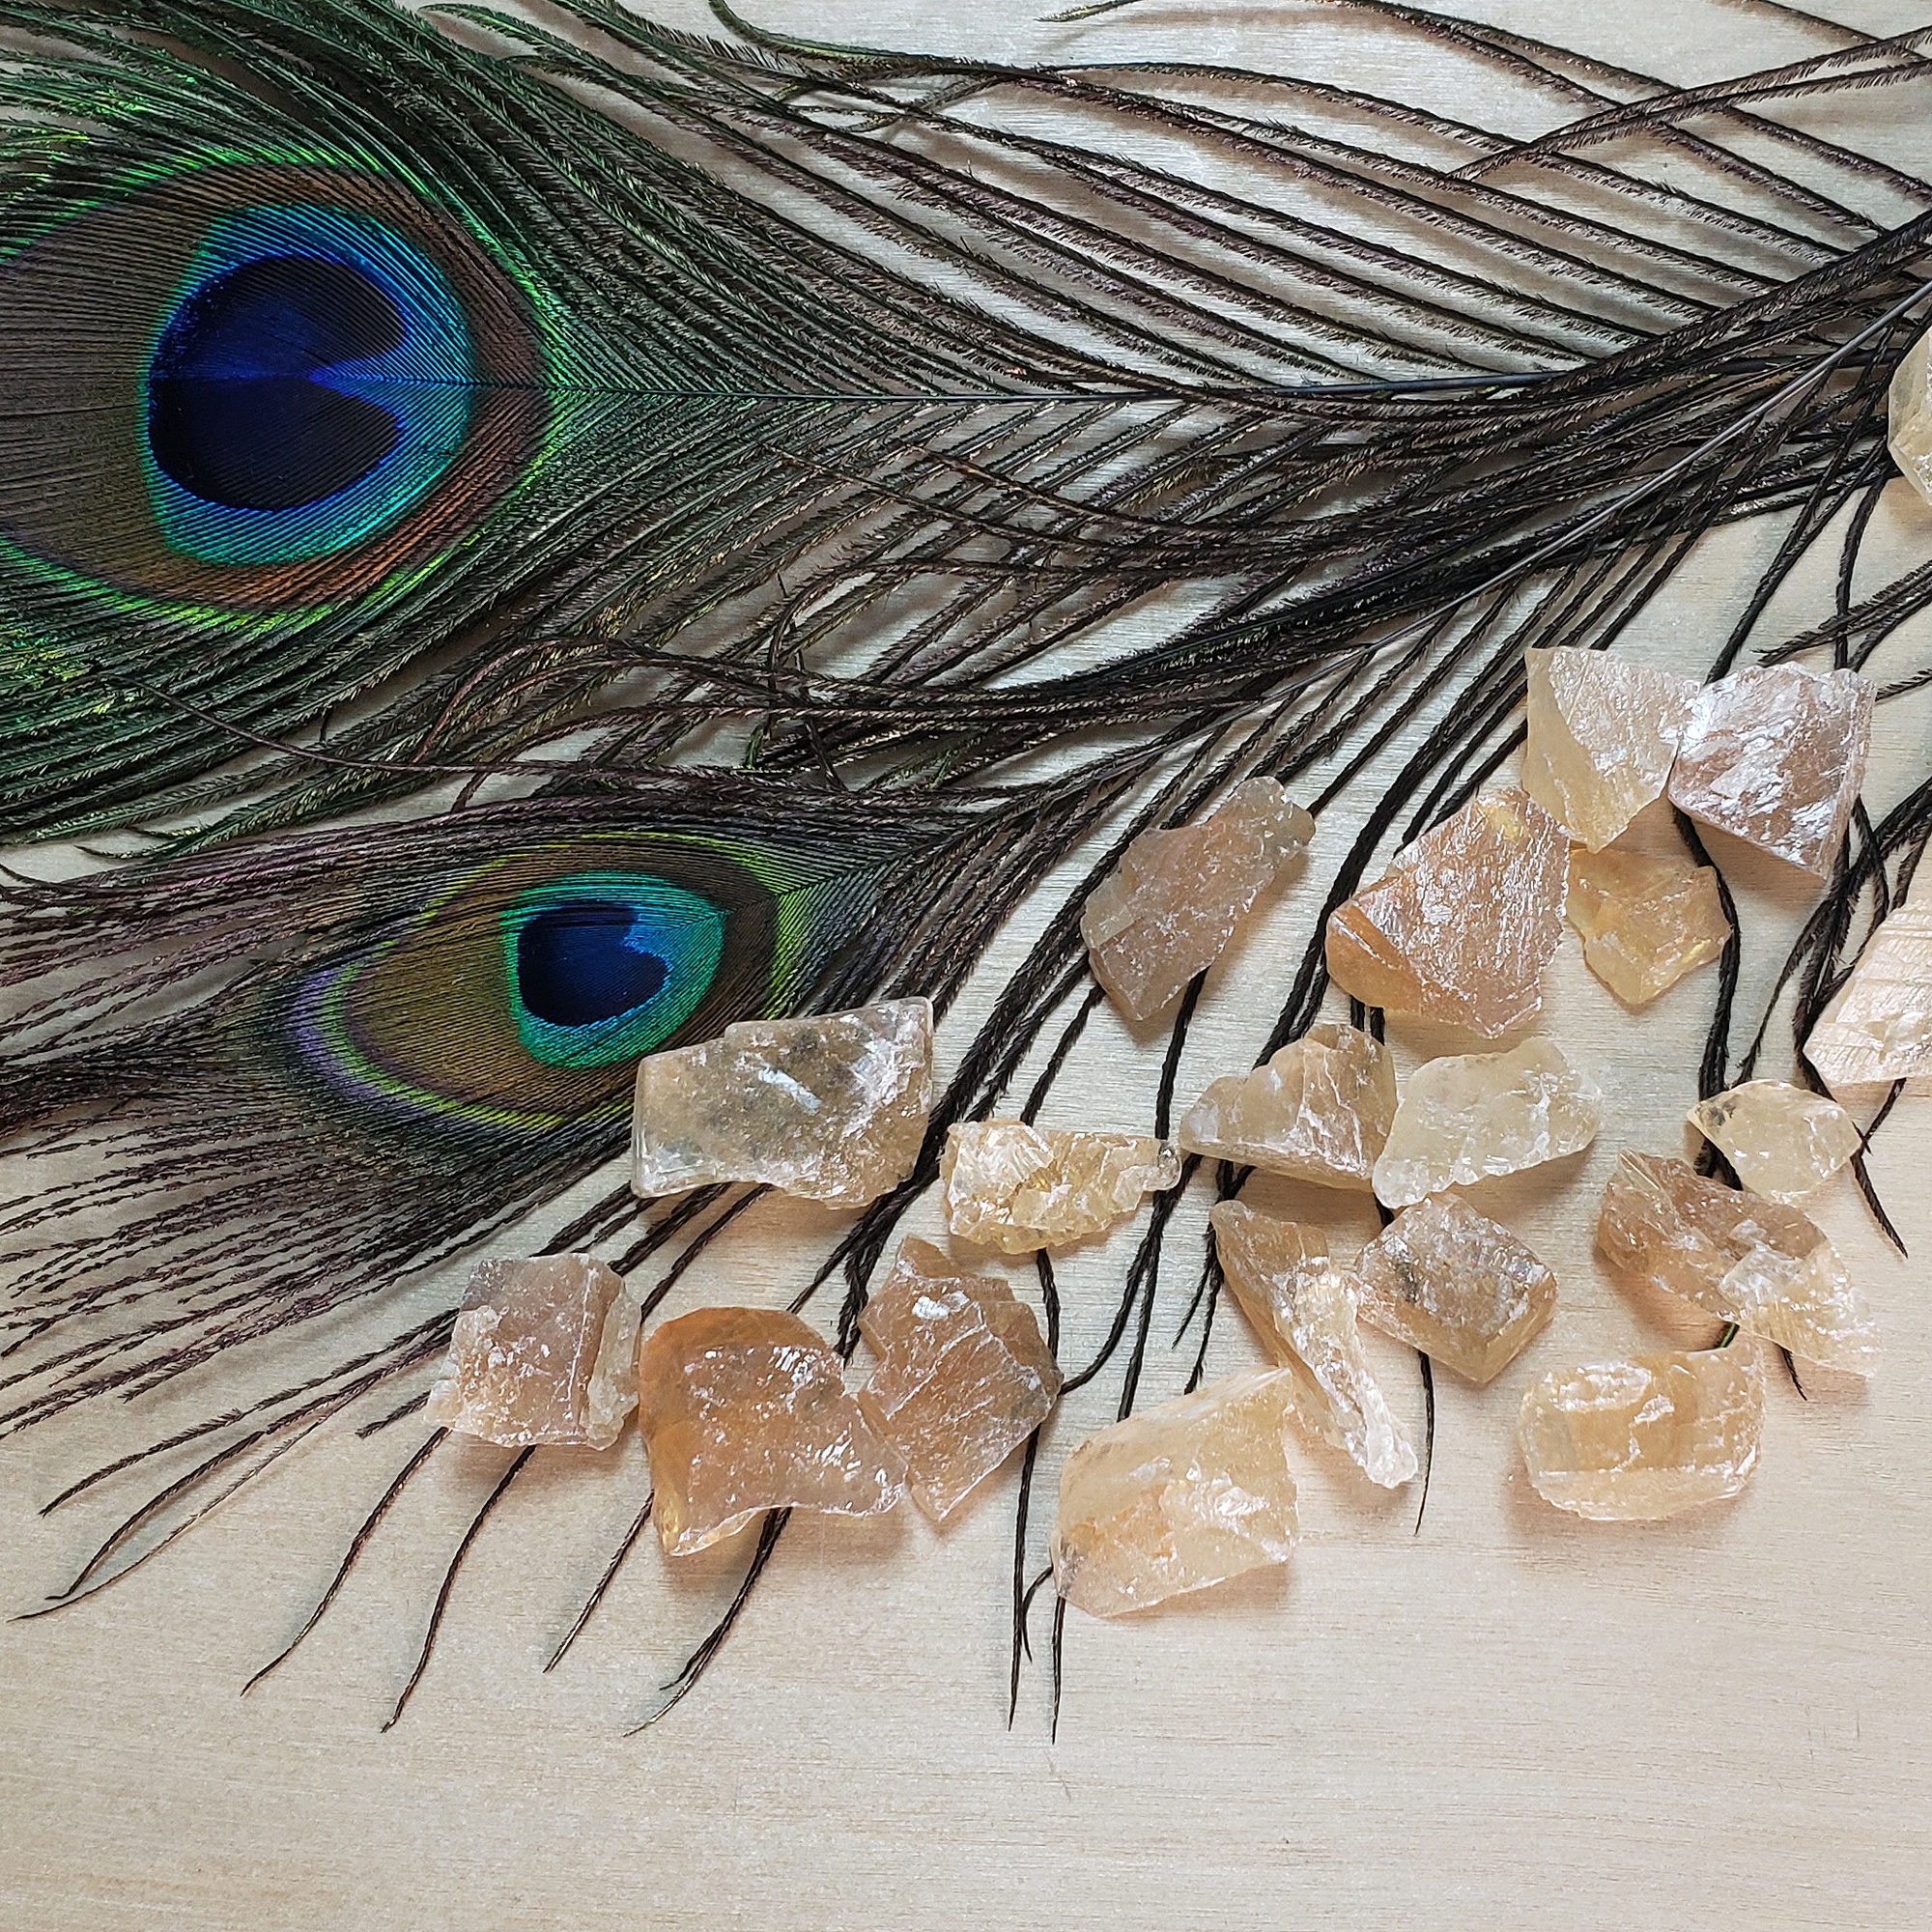 Honey Calcite Natural Raw Crystals Rough Gemstones - 3 Mini Stones - On Wooden Board with Peacock Feathers